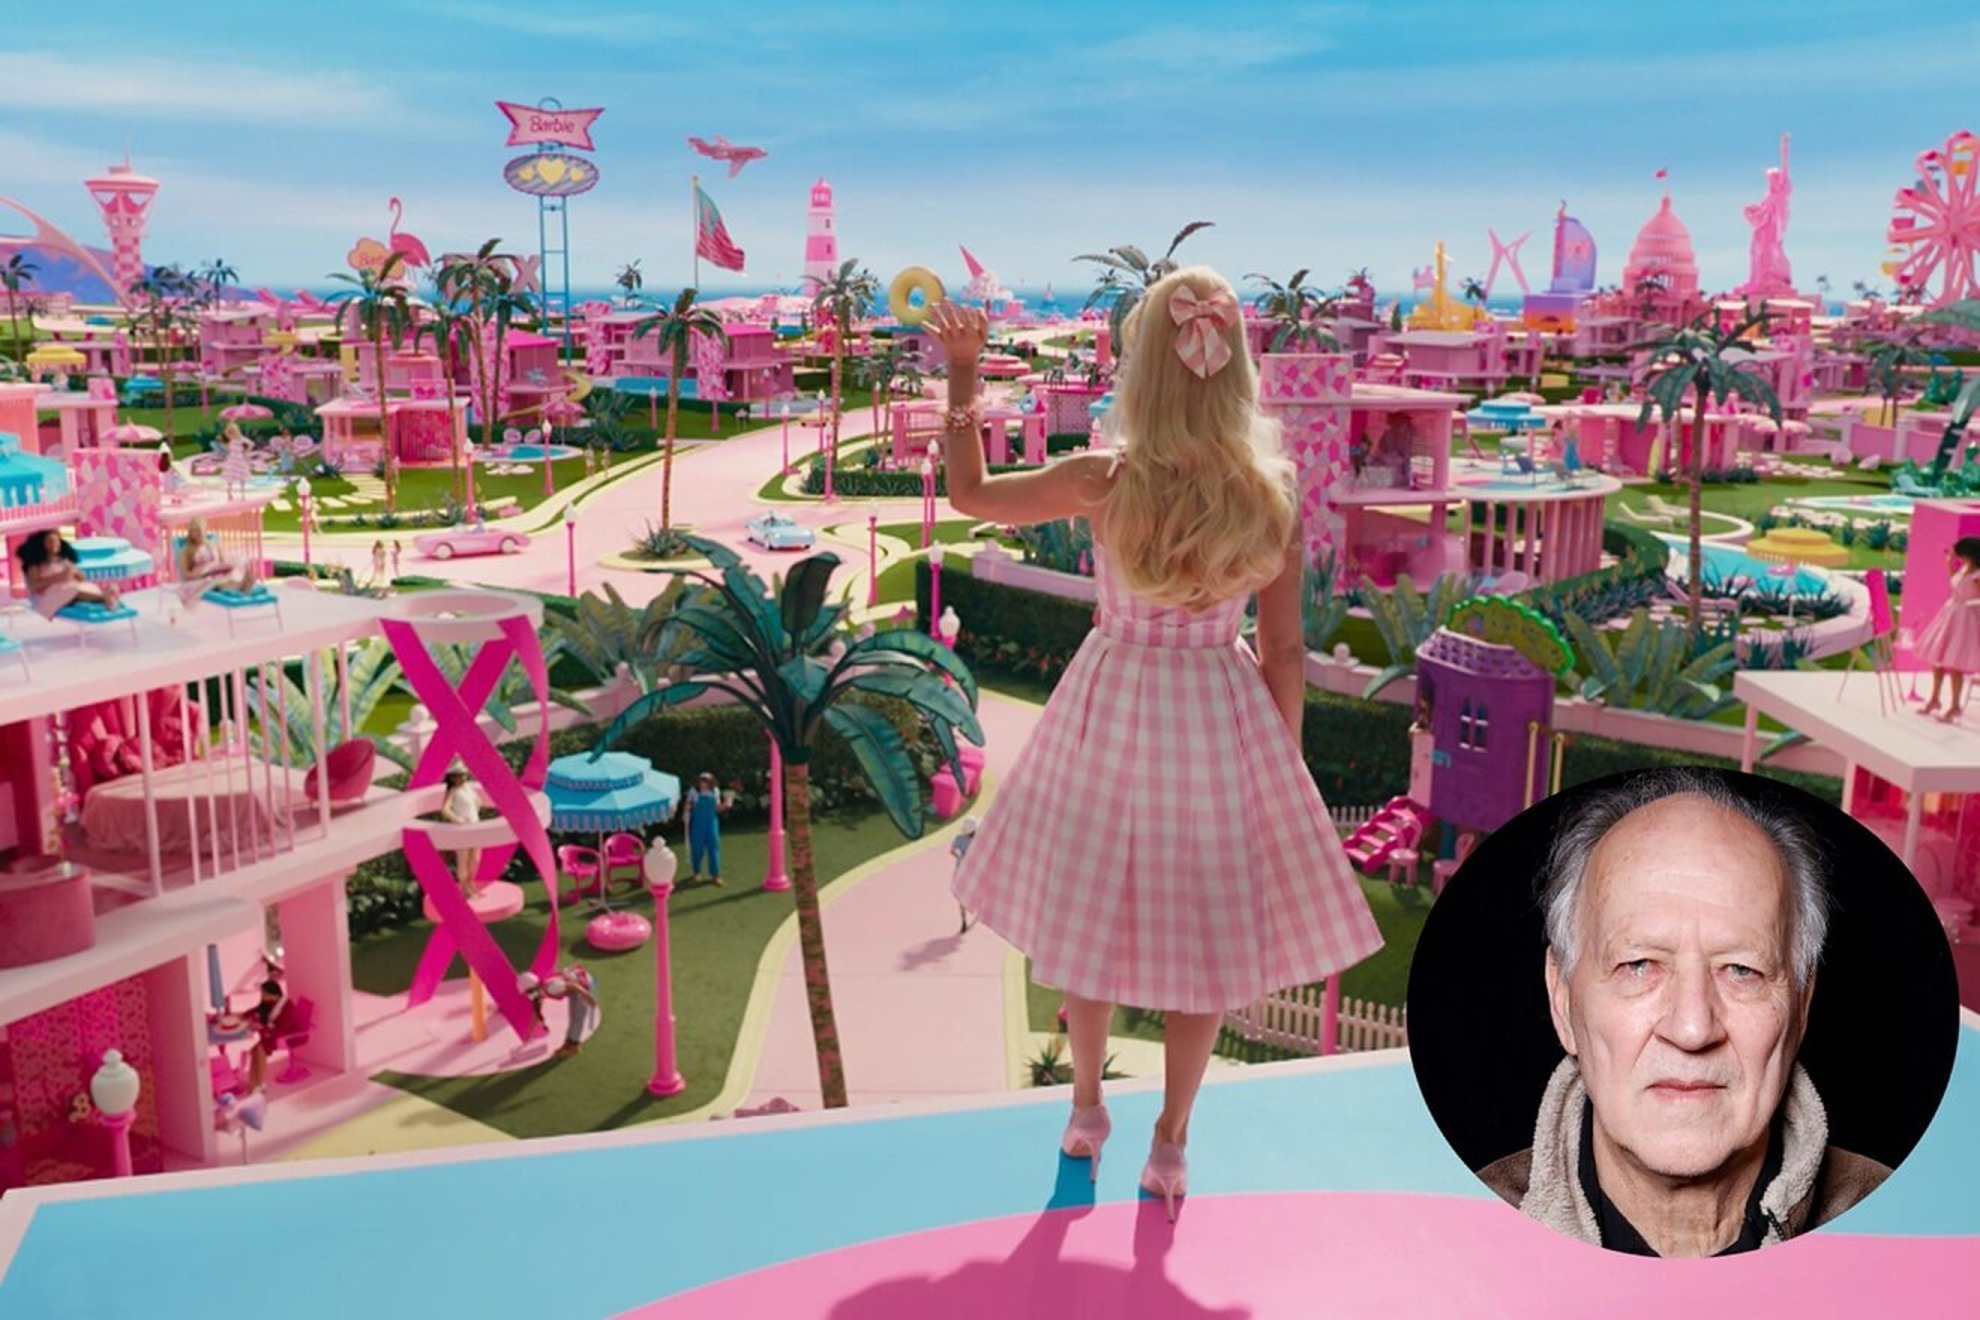 Werner Herzog harshly criticized Barbie after only 30 minutes of watching the film